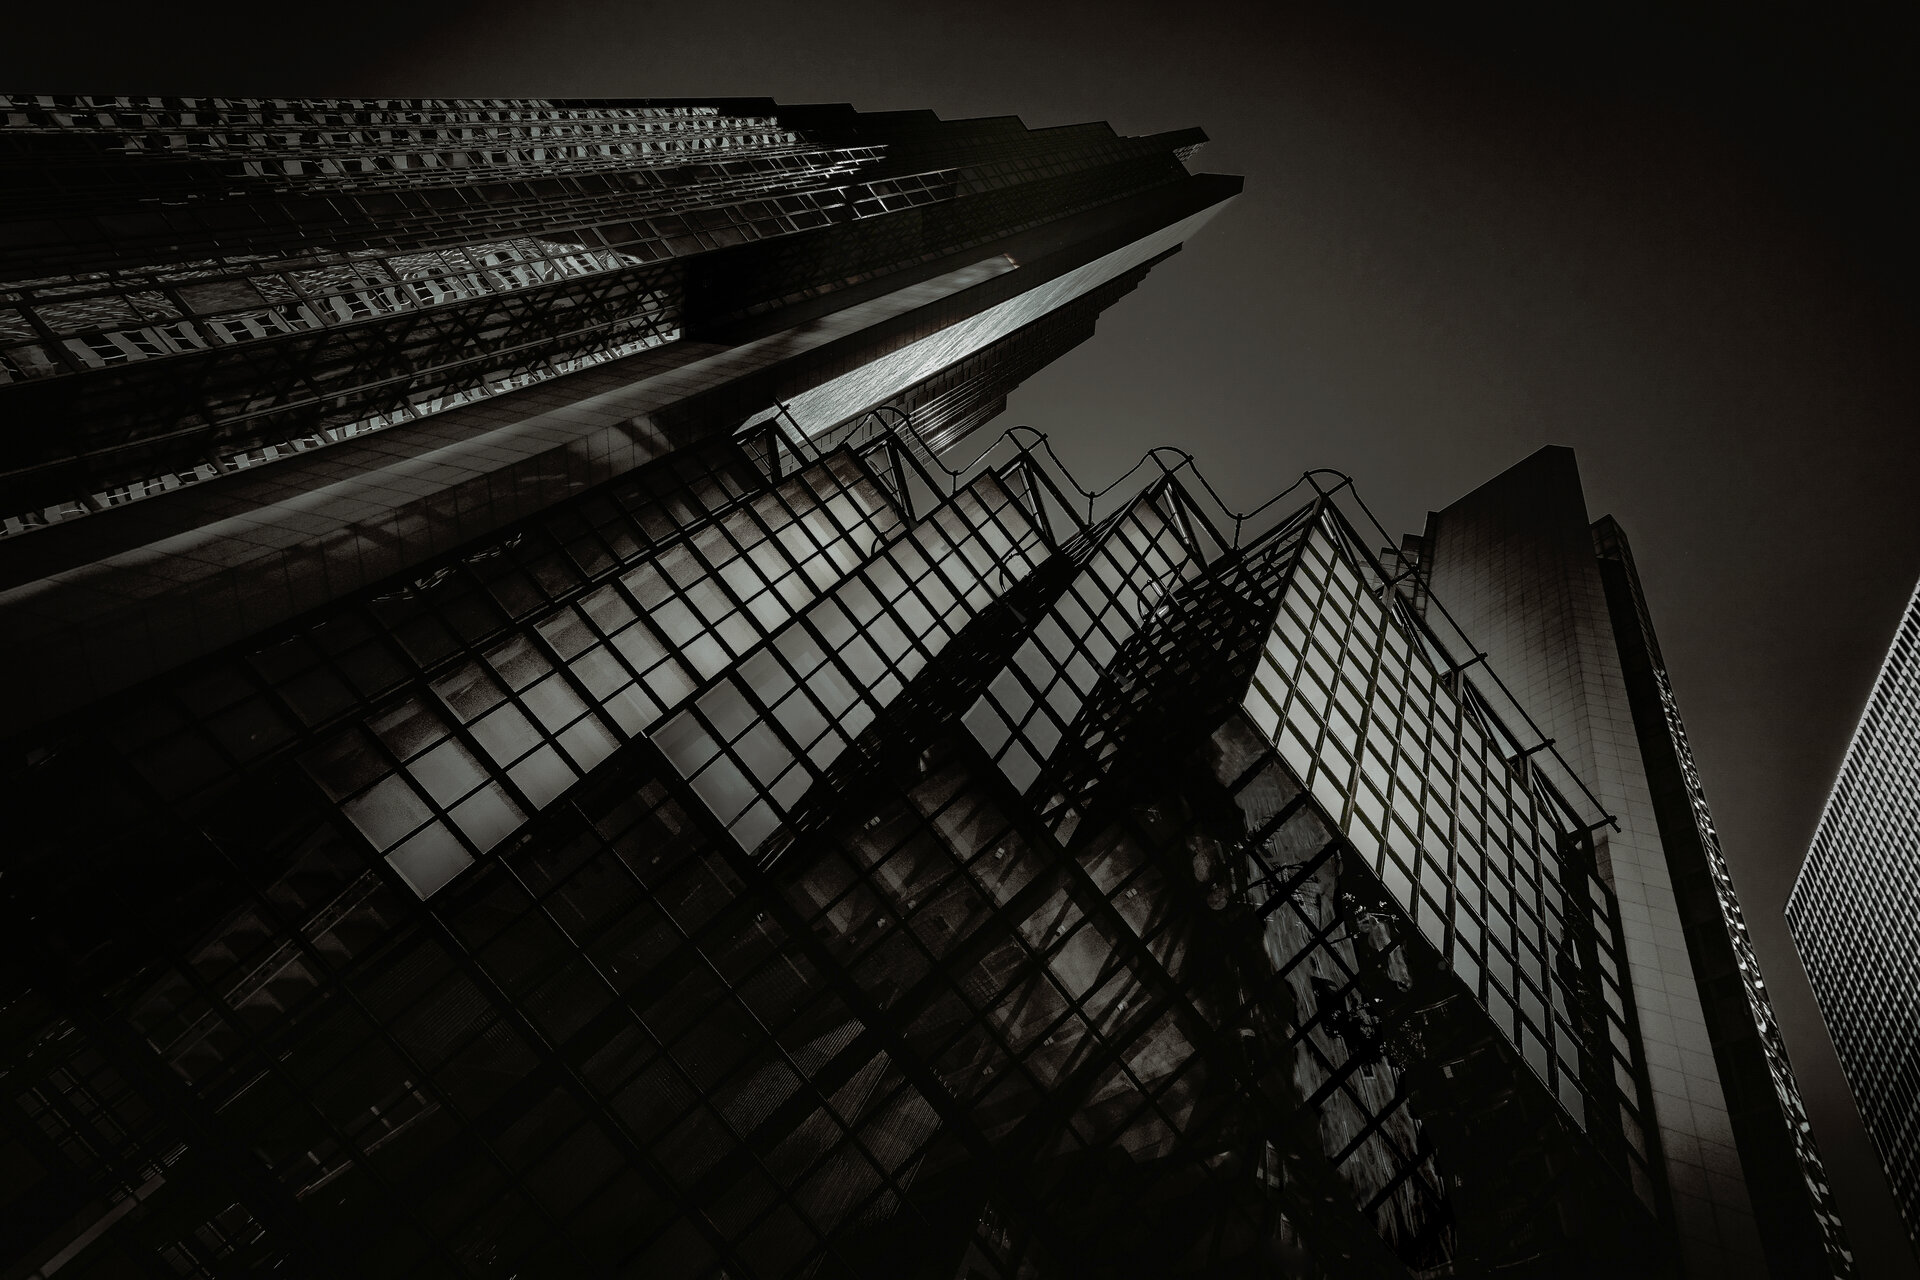 Relentless Verticality | Author  as_is - as_is | PHOTO FORUM